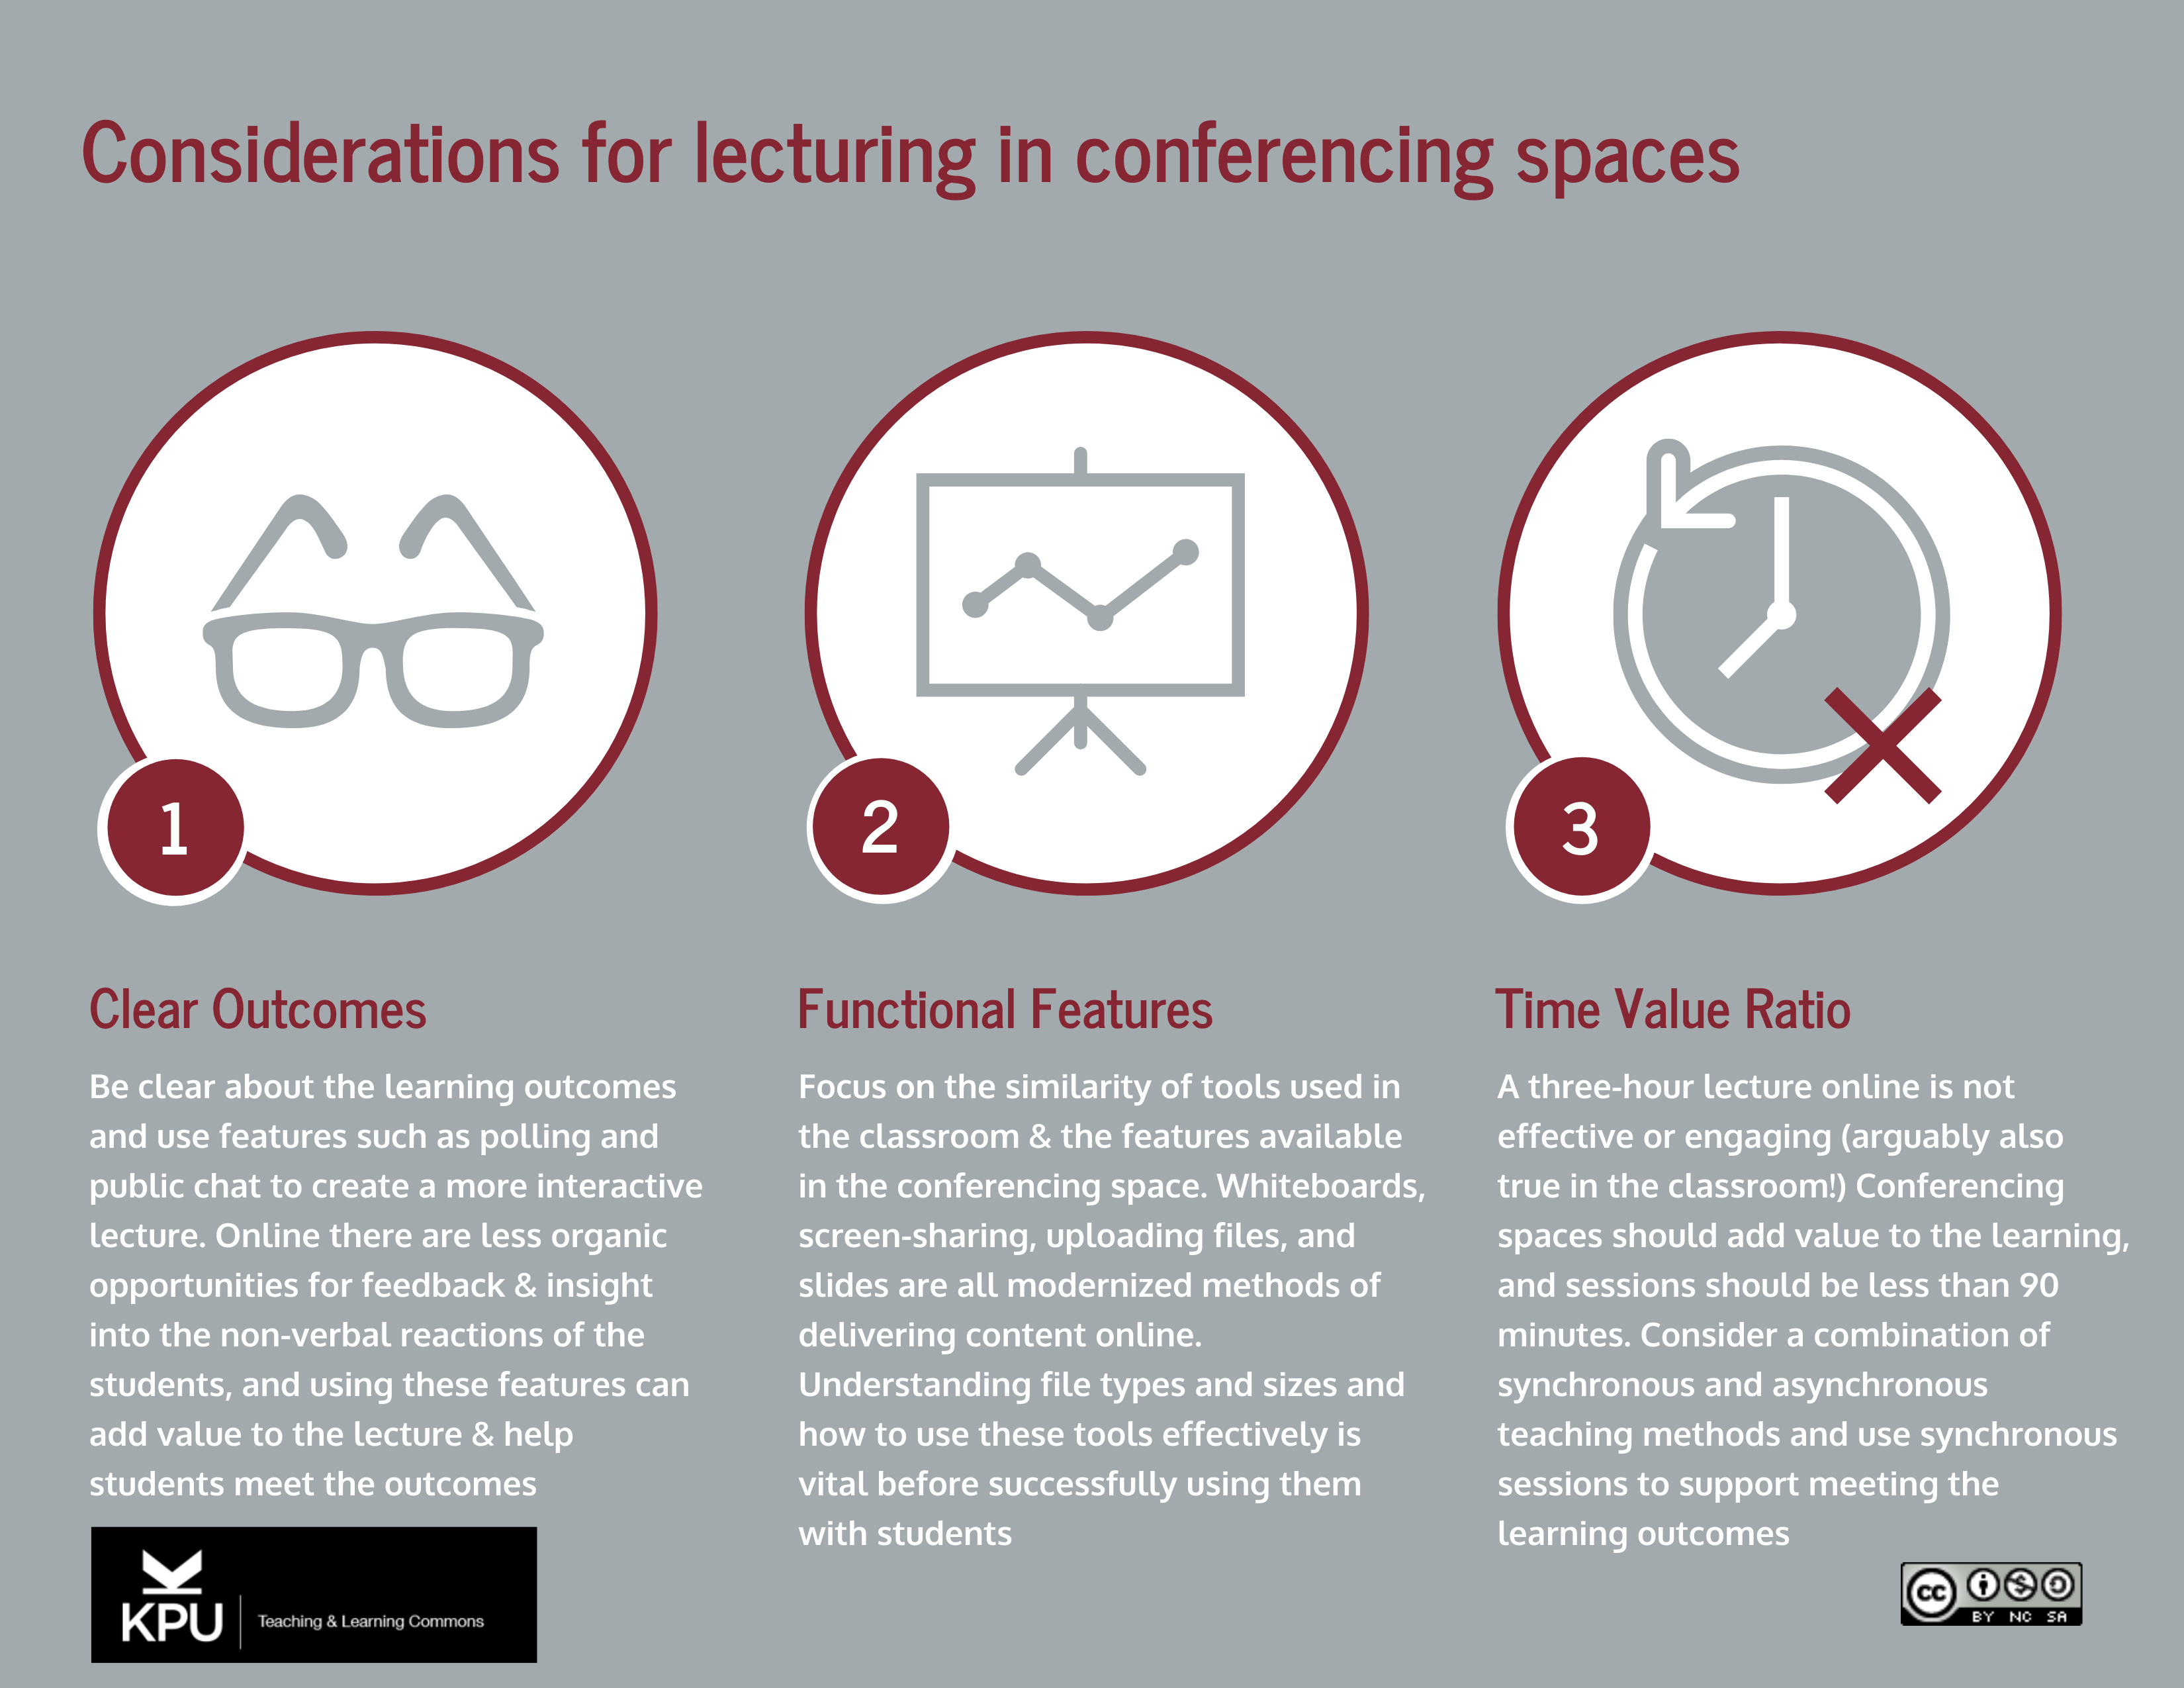 infographic depicting considerations for lecturing in conferencing spaces